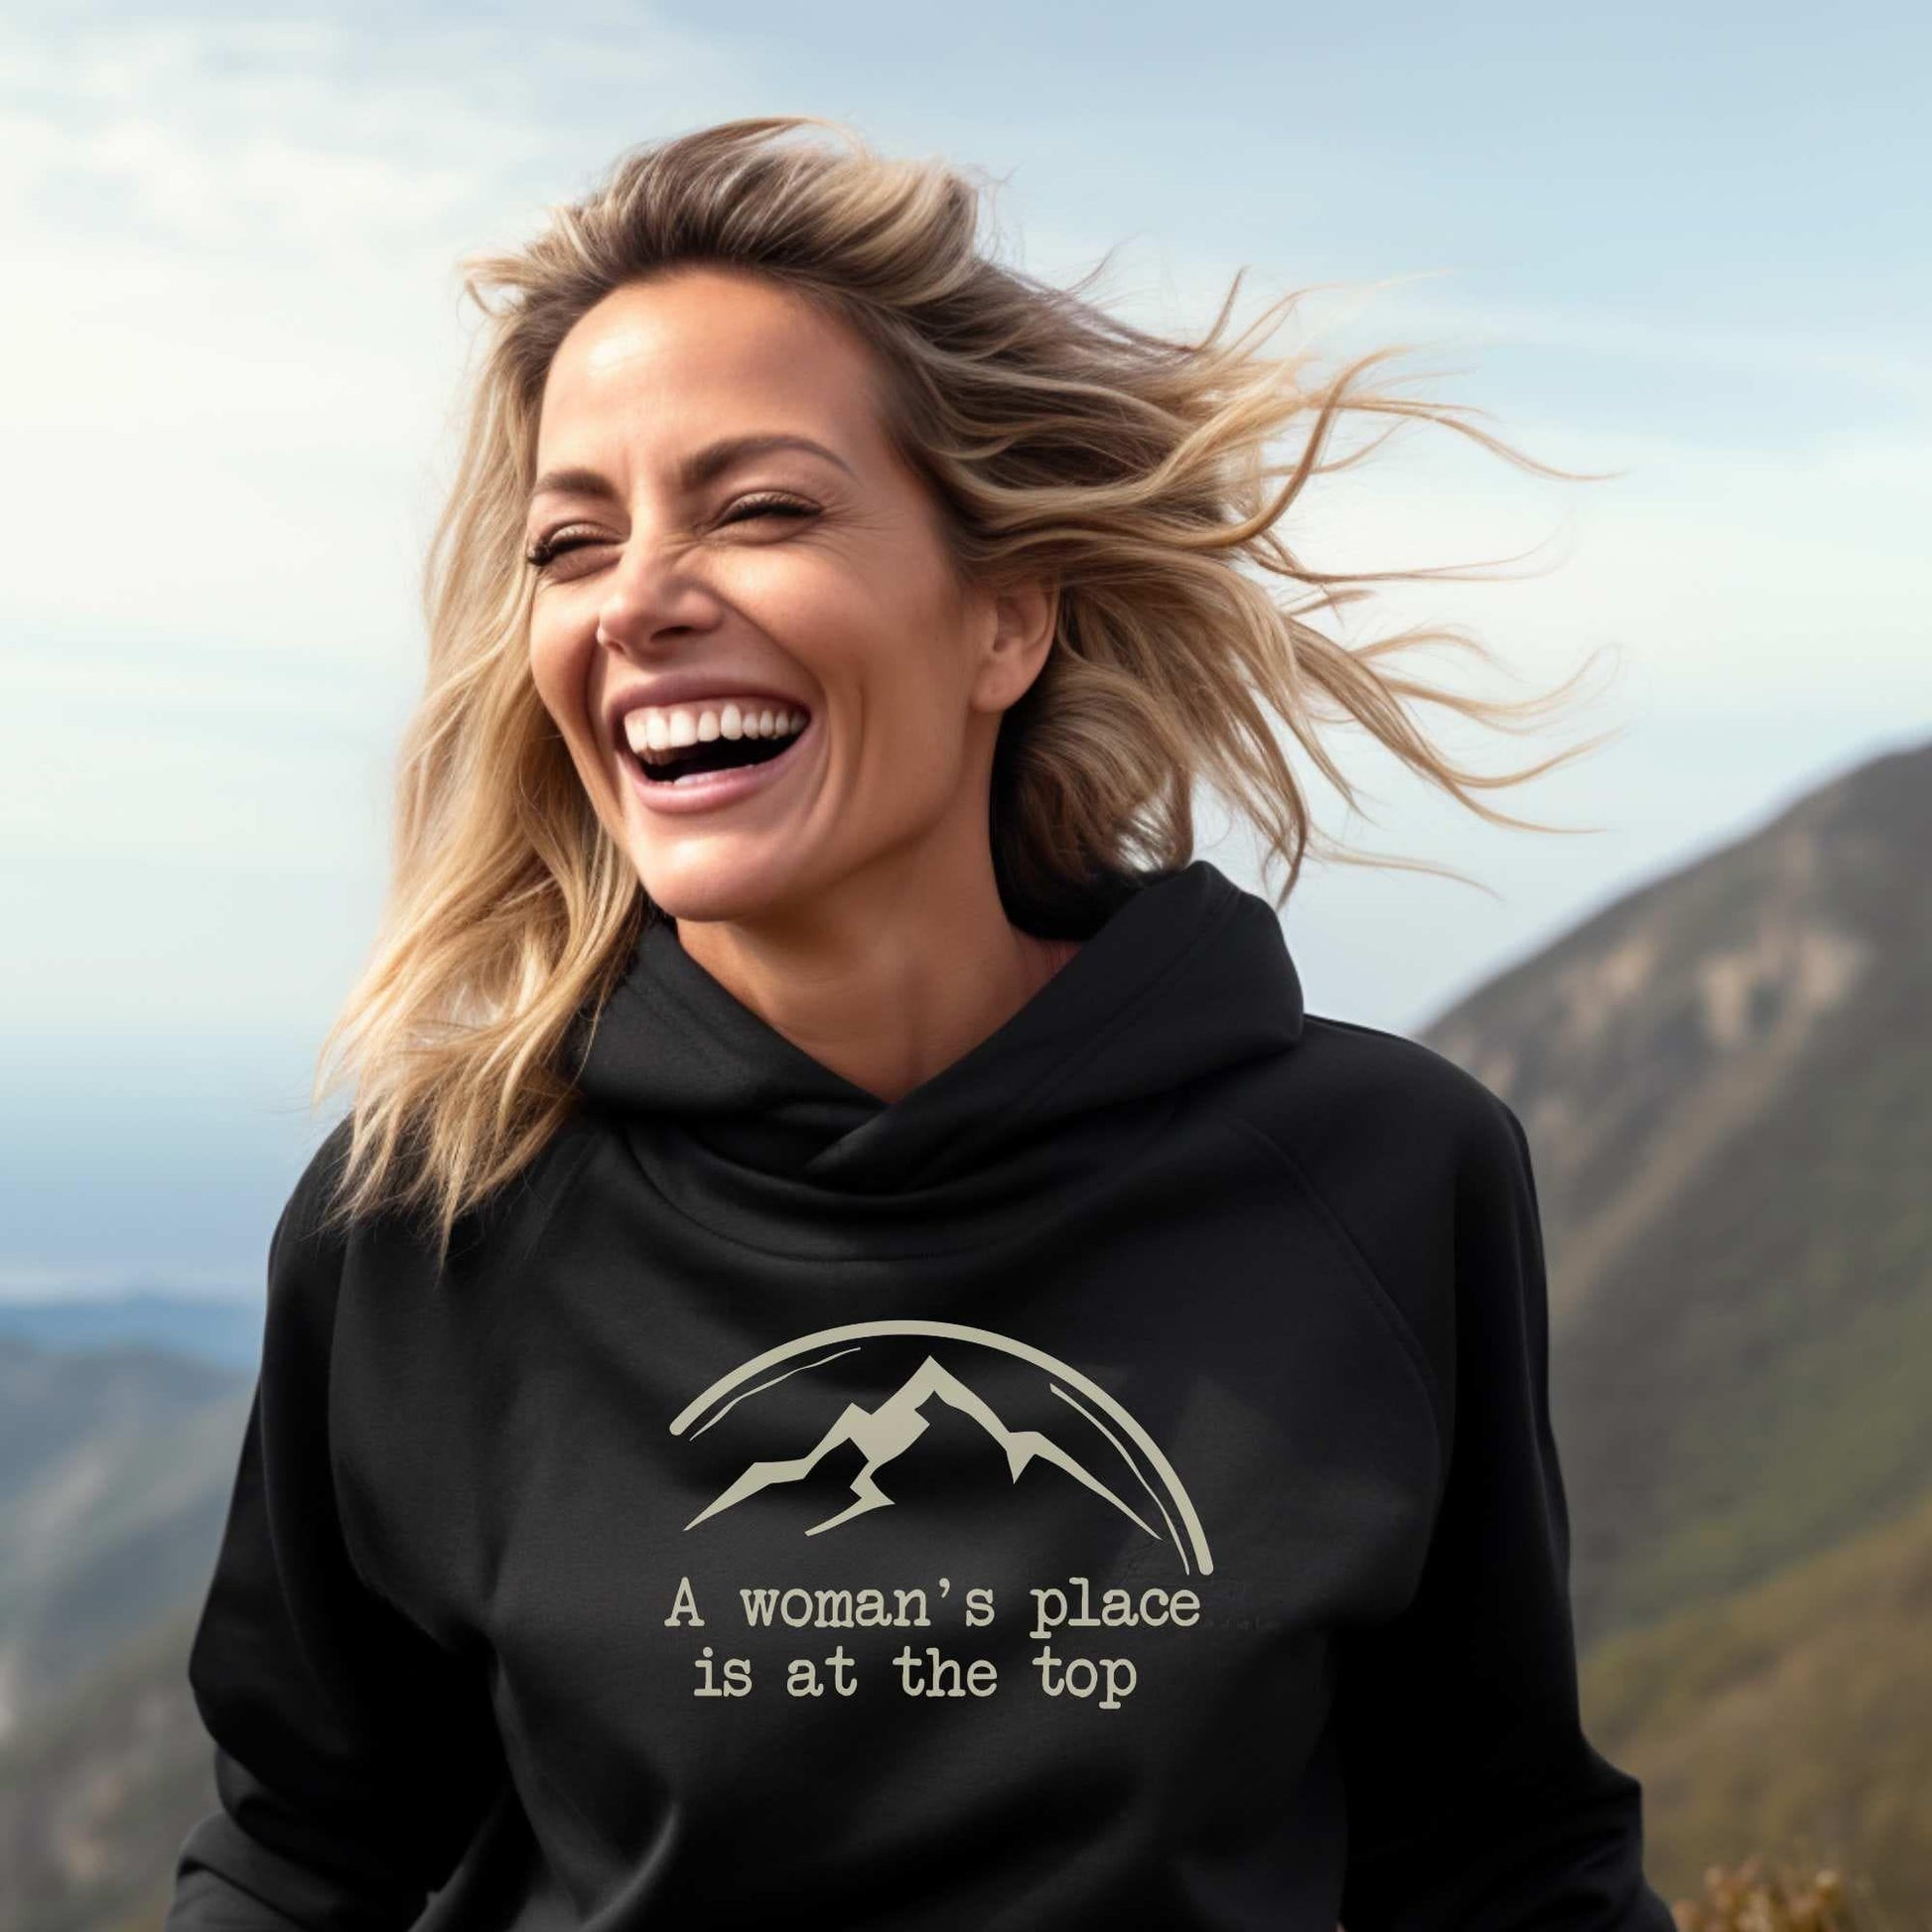 A Woman's Place Is At The Top Hoodie - Adventure Threads Company